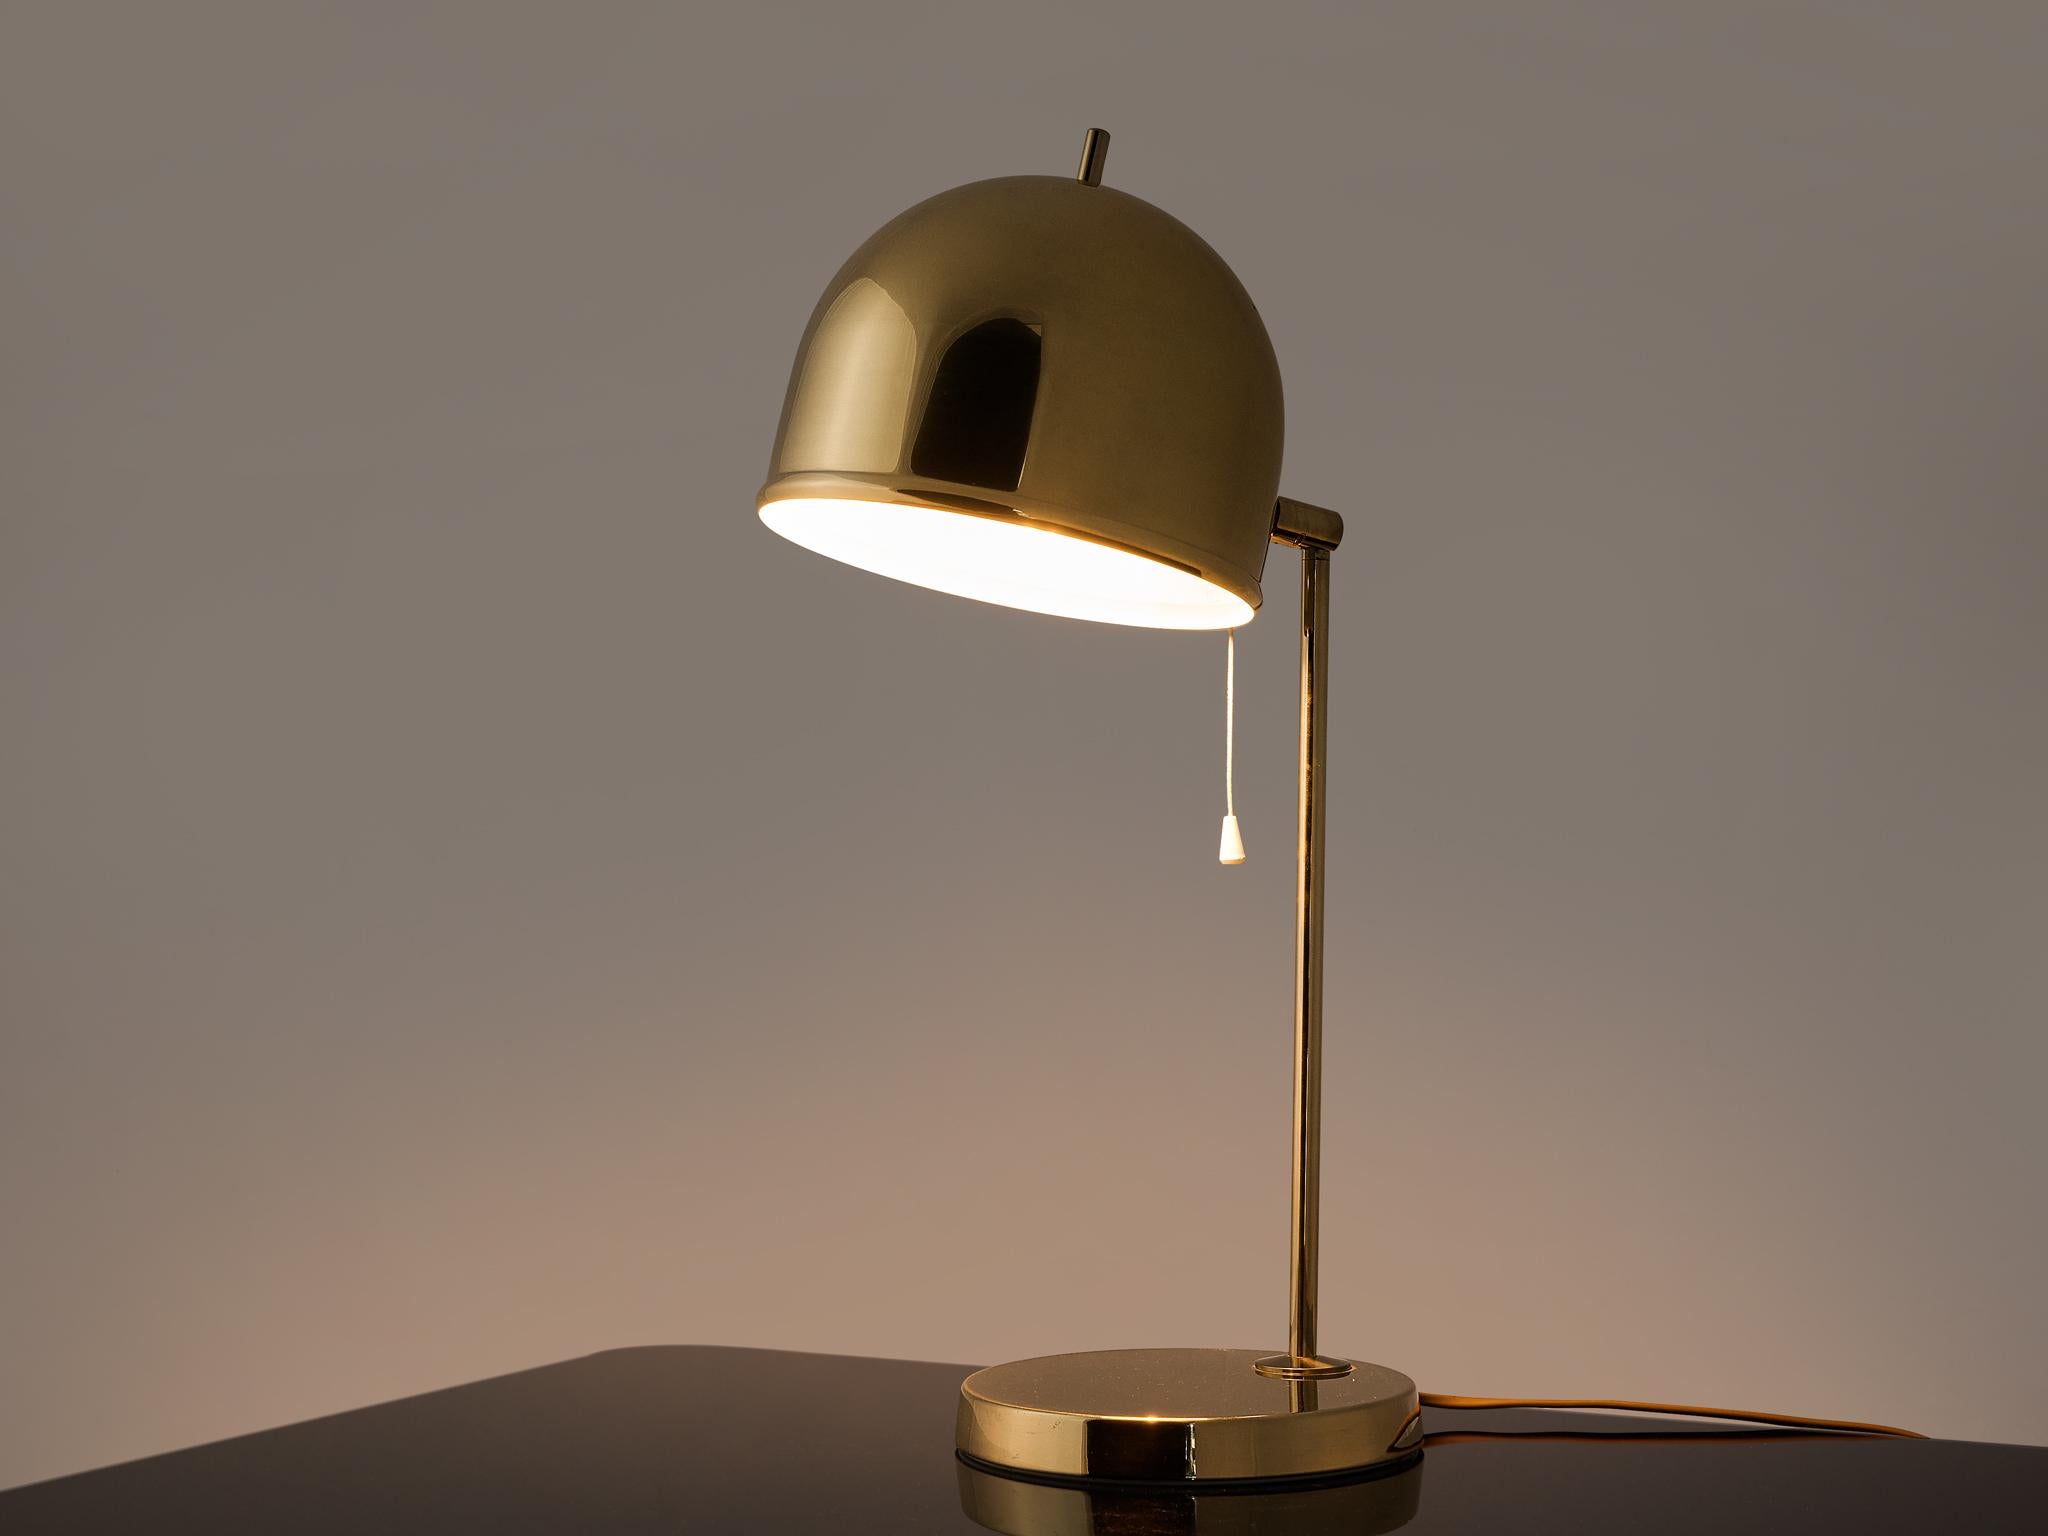 Bergboms, table lamp, model B-075, brass, plastic, Sweden, 1960s.

This delicate table lamp of Swedish origin embodies a splendid construction of round shapes and delicate lines. The shade is well-executed showing a round-shaped structure. A nice